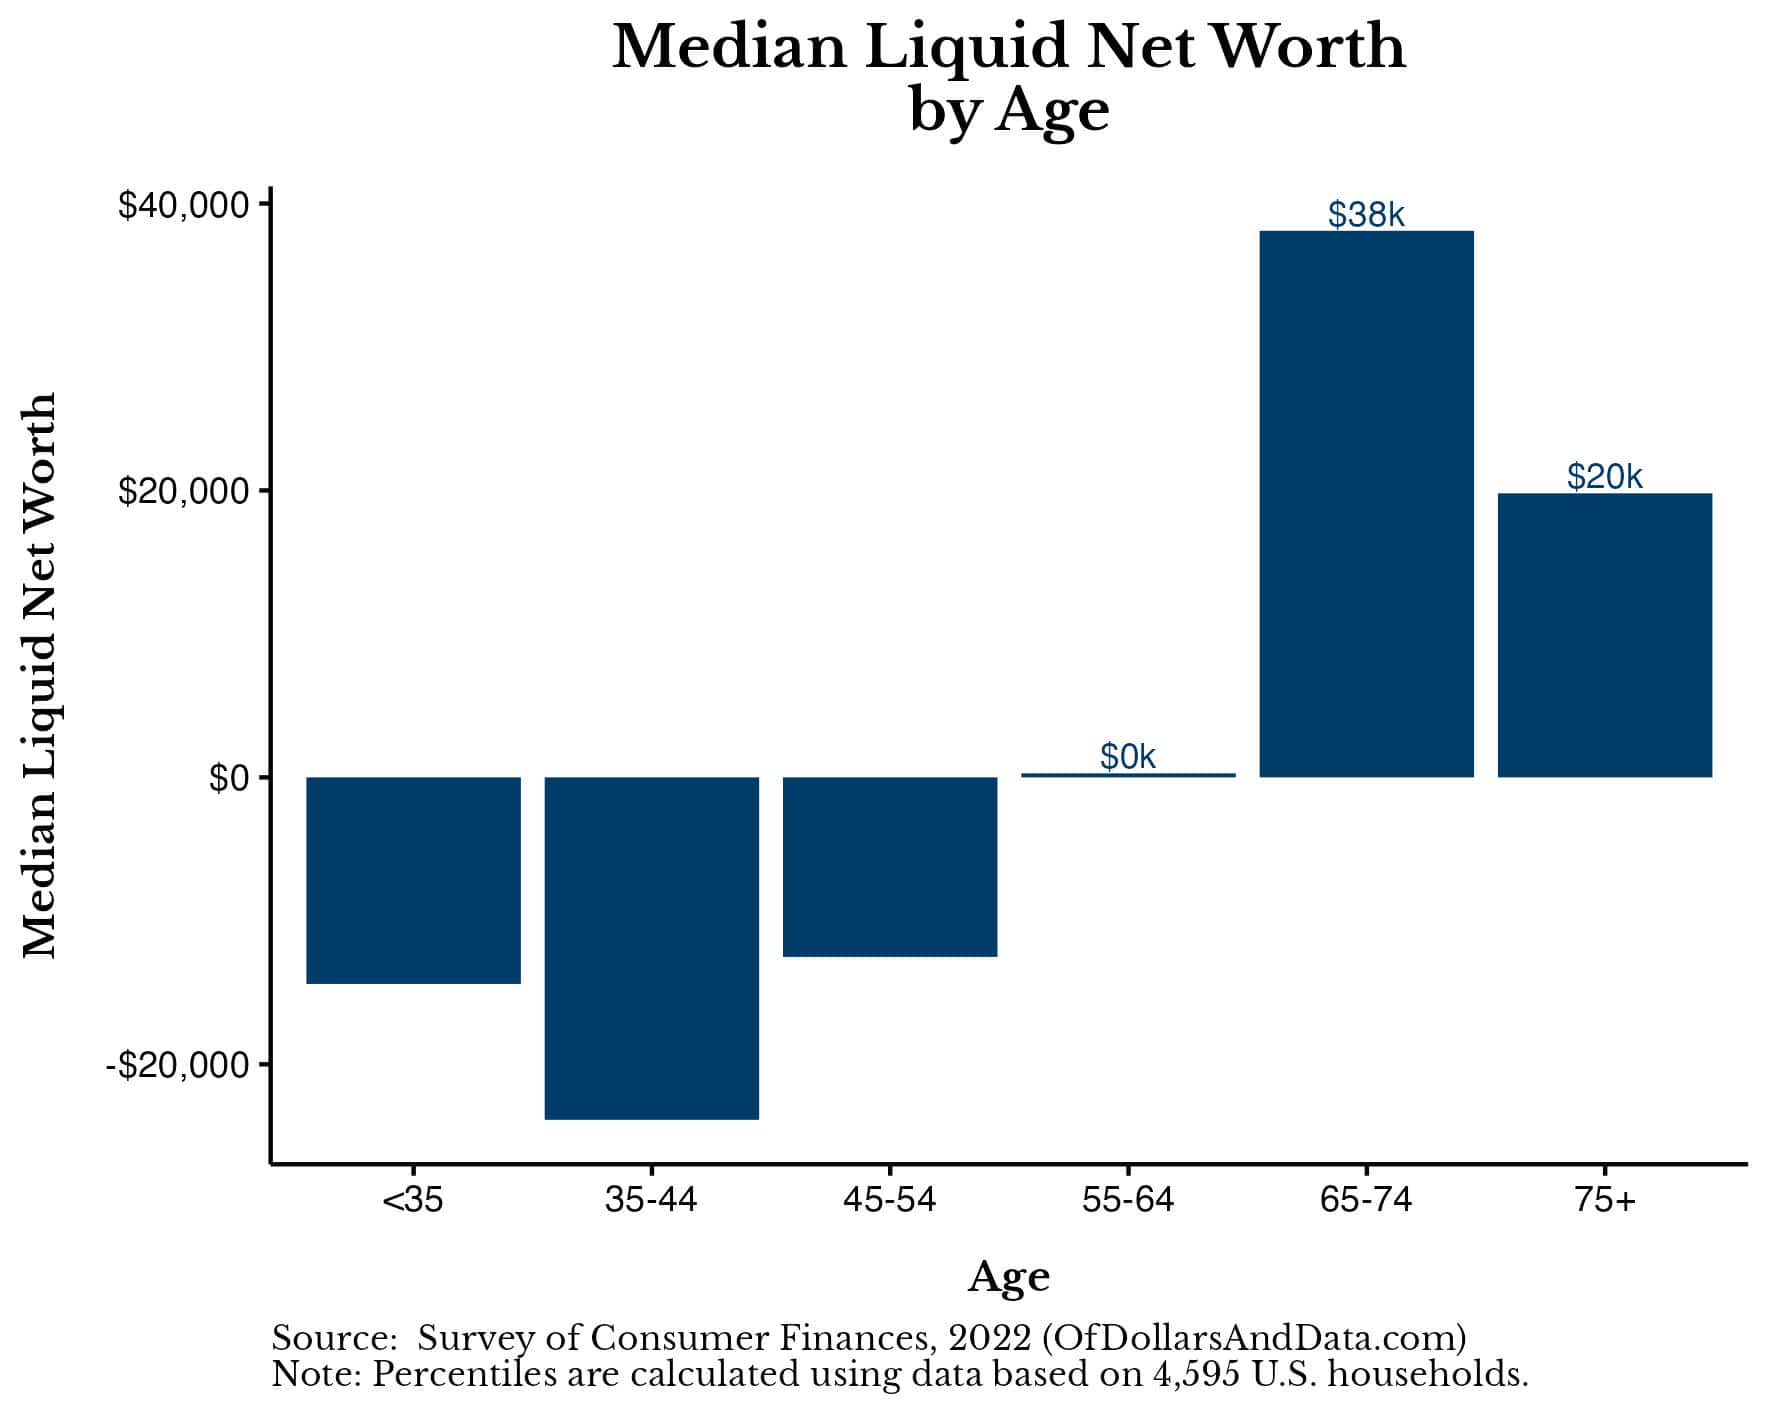 Chart showing median liquid net worth by age.